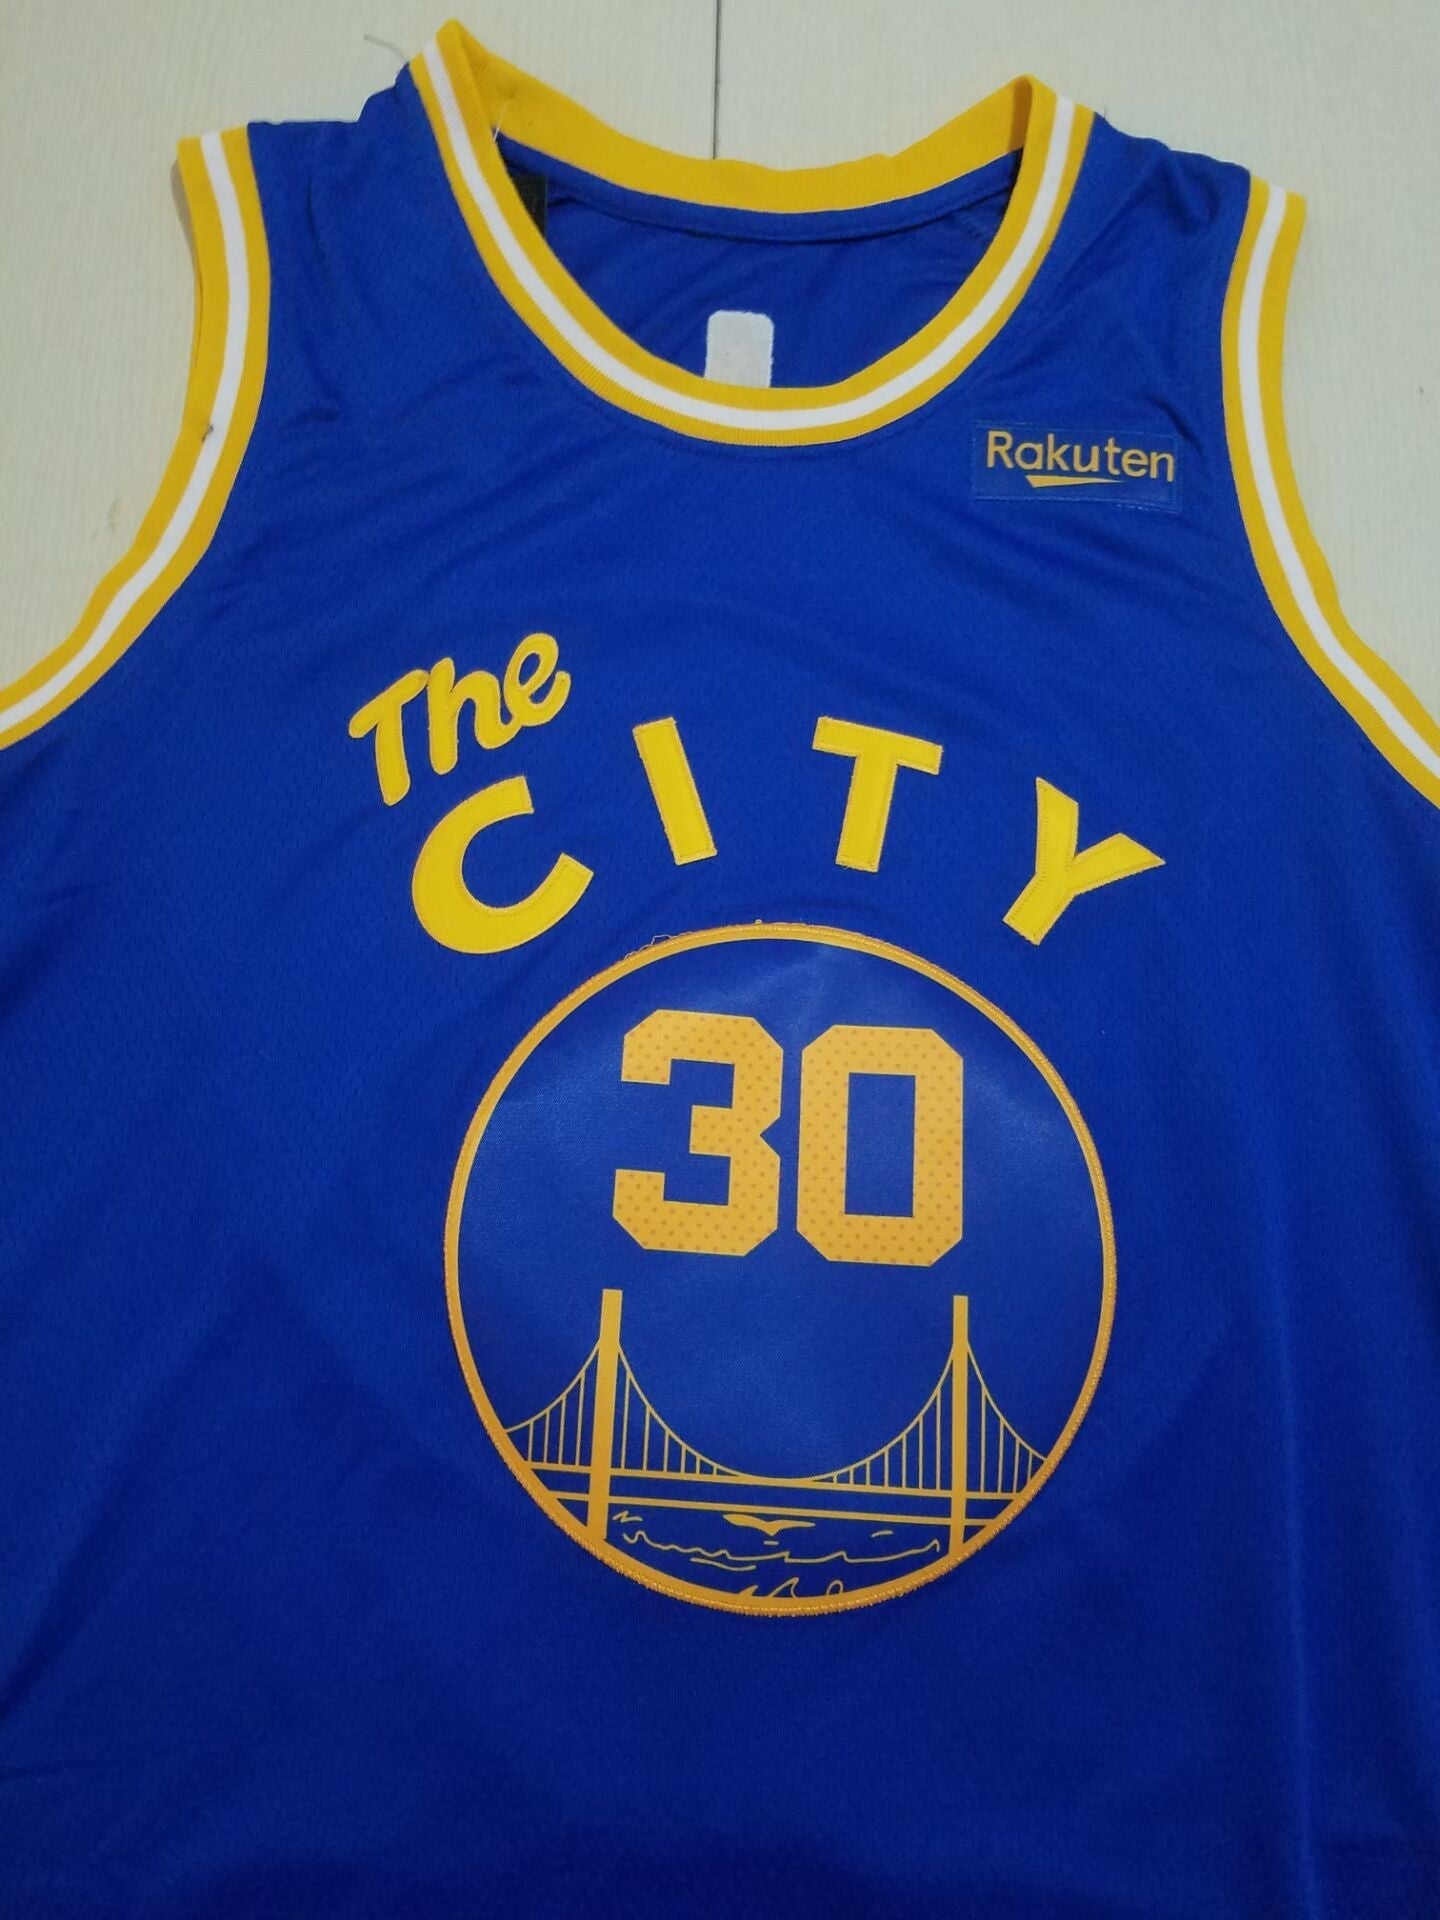 Men's Golden State Warriors Stephen Curry Blue 2020/21 Jersey - Classic Edition